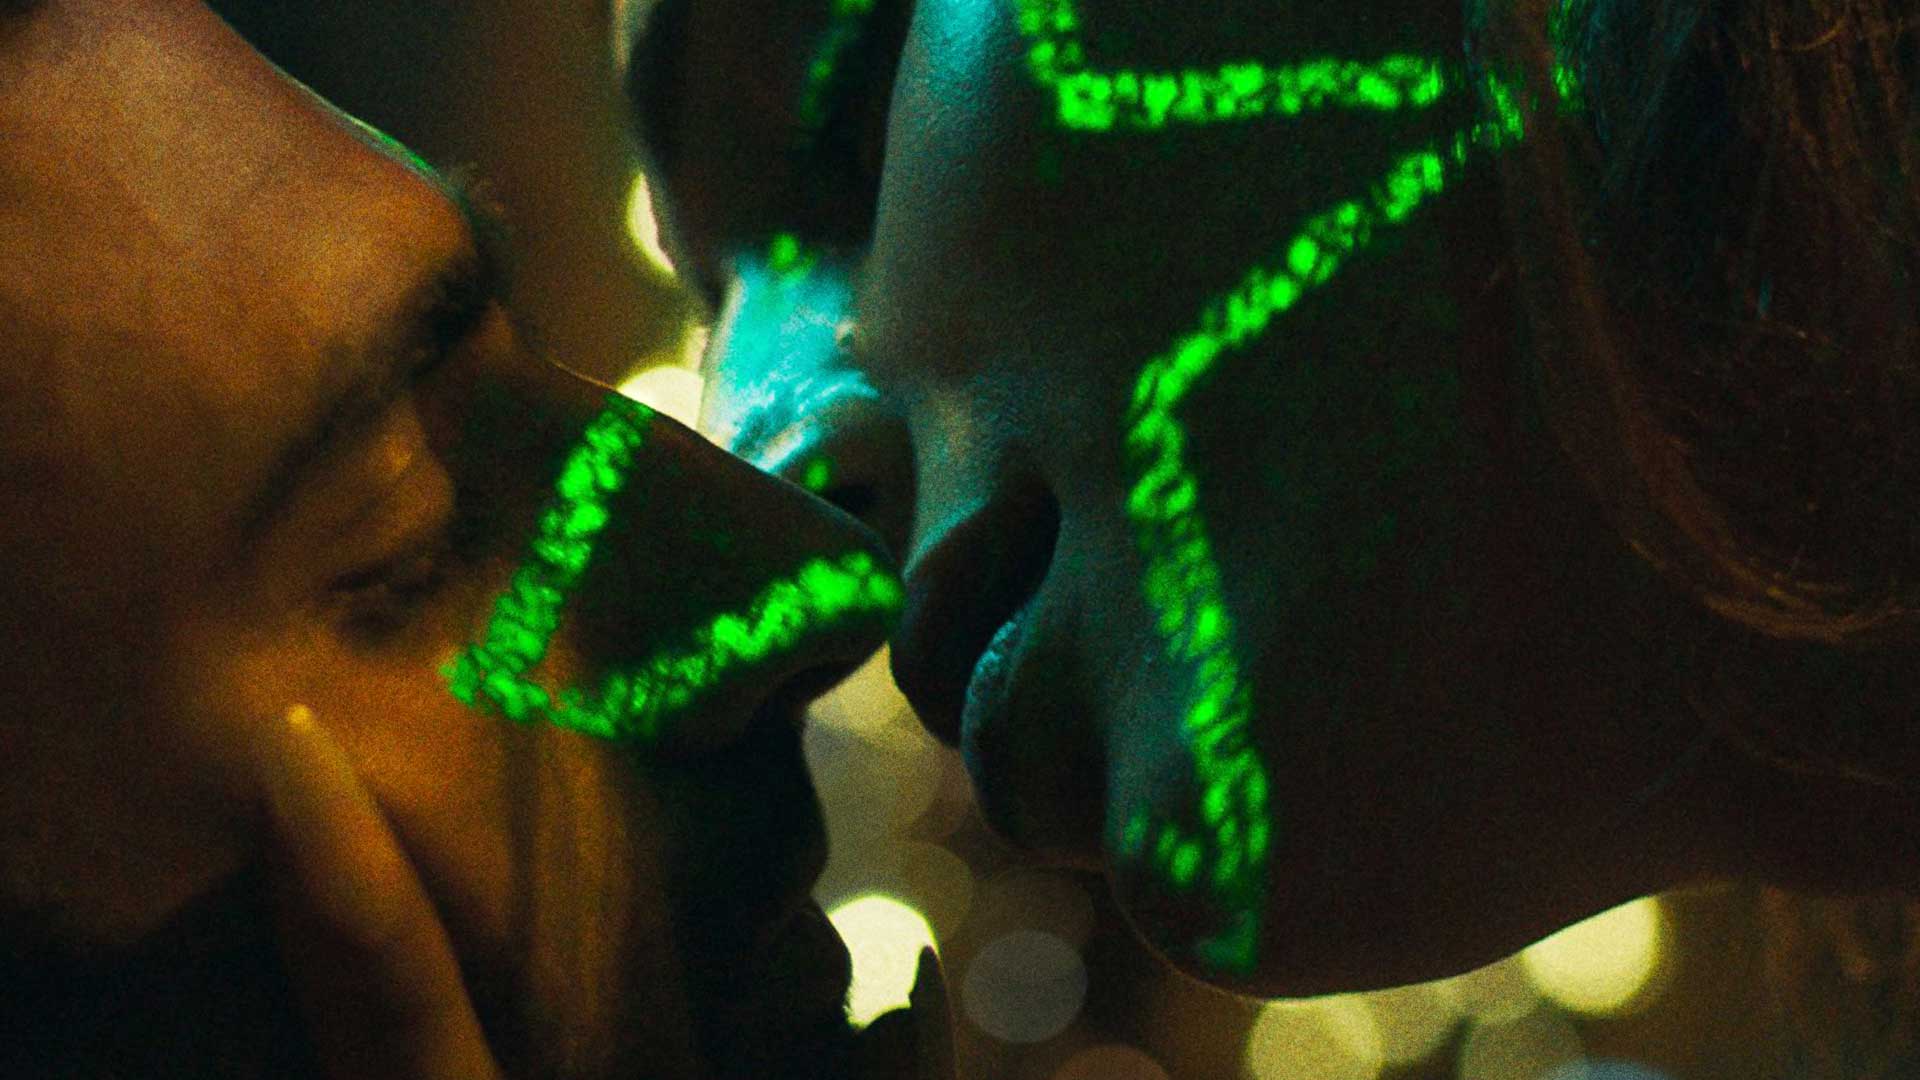 A closeup of two people kissing in the dark, with the bright light of a projection in the shape of a star hitting their faces.